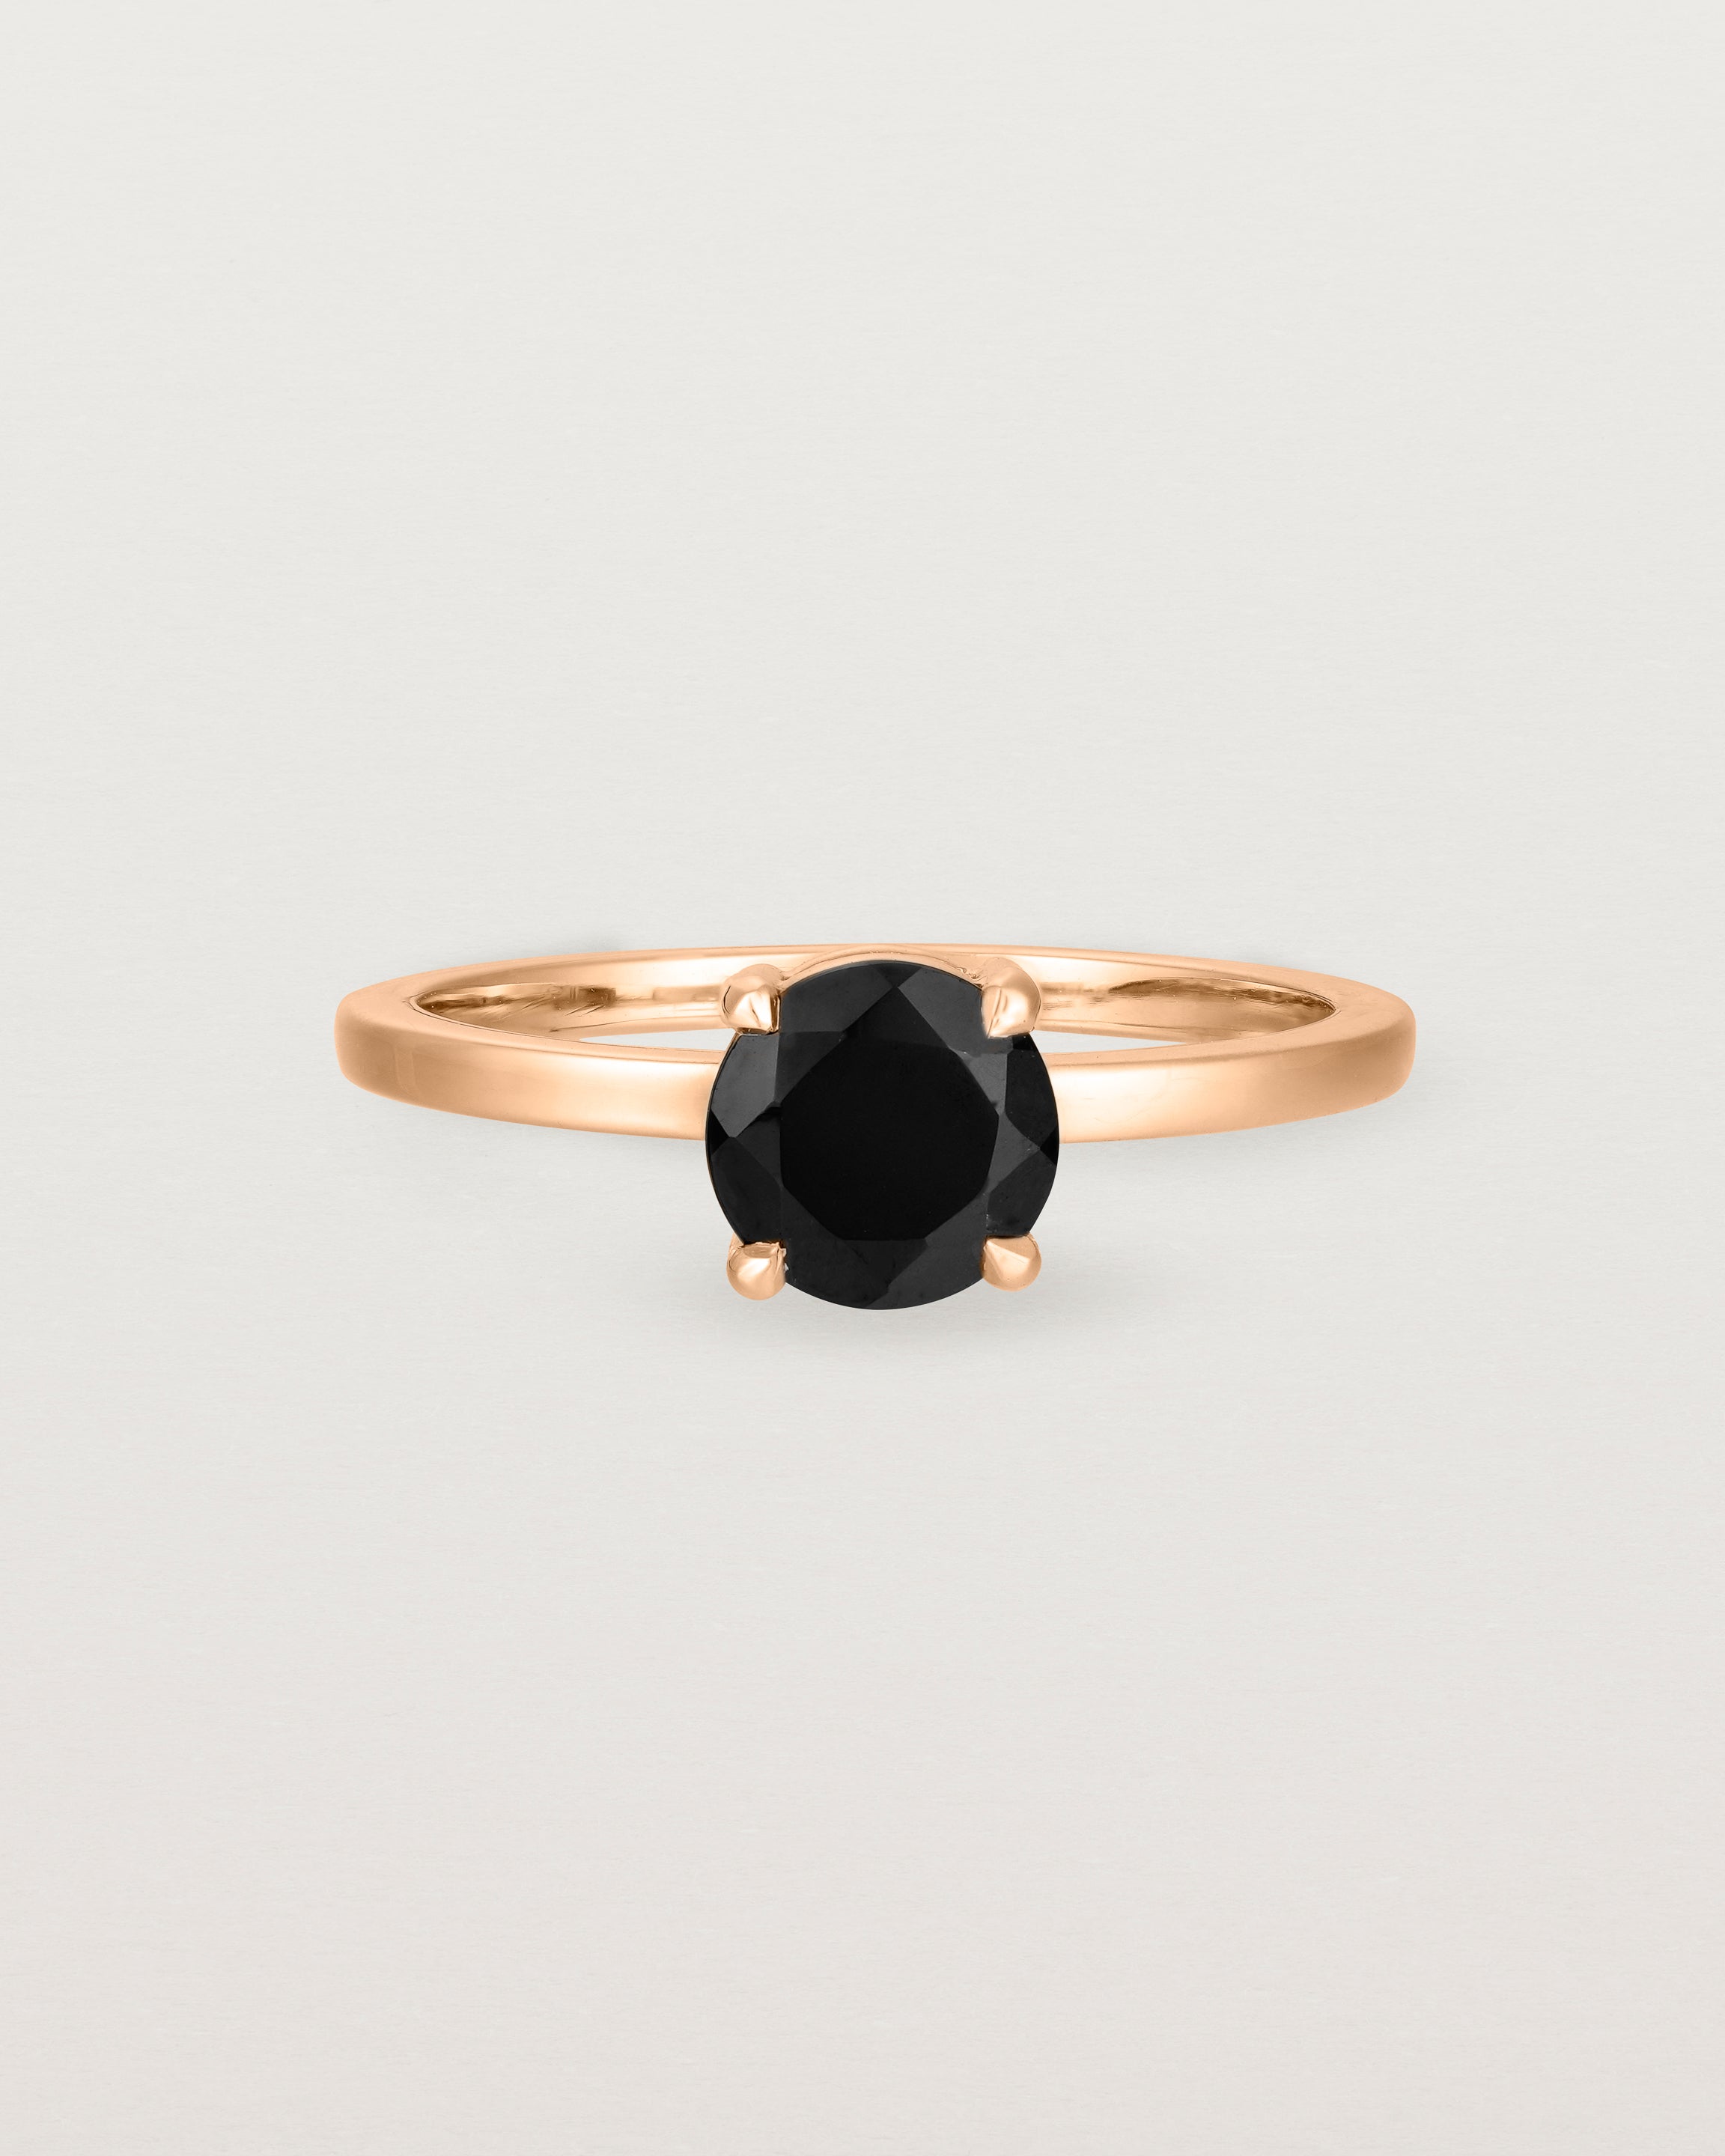 Front view of the Petite Una Round Solitaire | Black Spinel | Rose Gold.